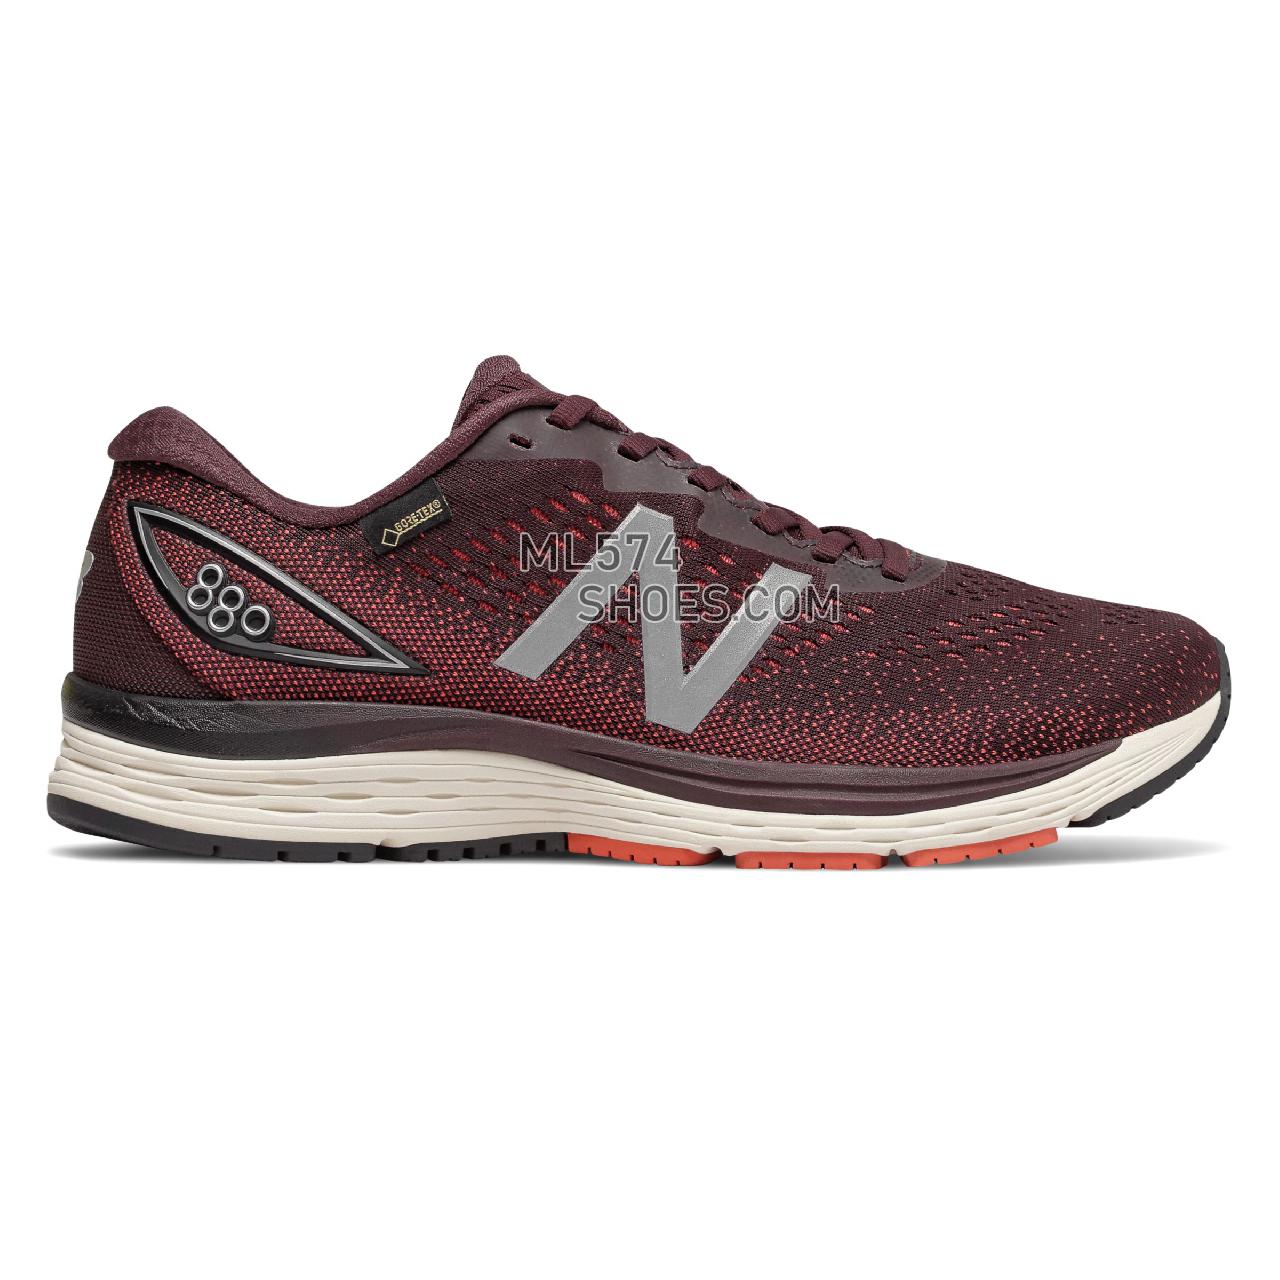 New Balance 880v9 GTX - Men's Neutral Running - Henna with Maroon and Coral Glow - M880GT9